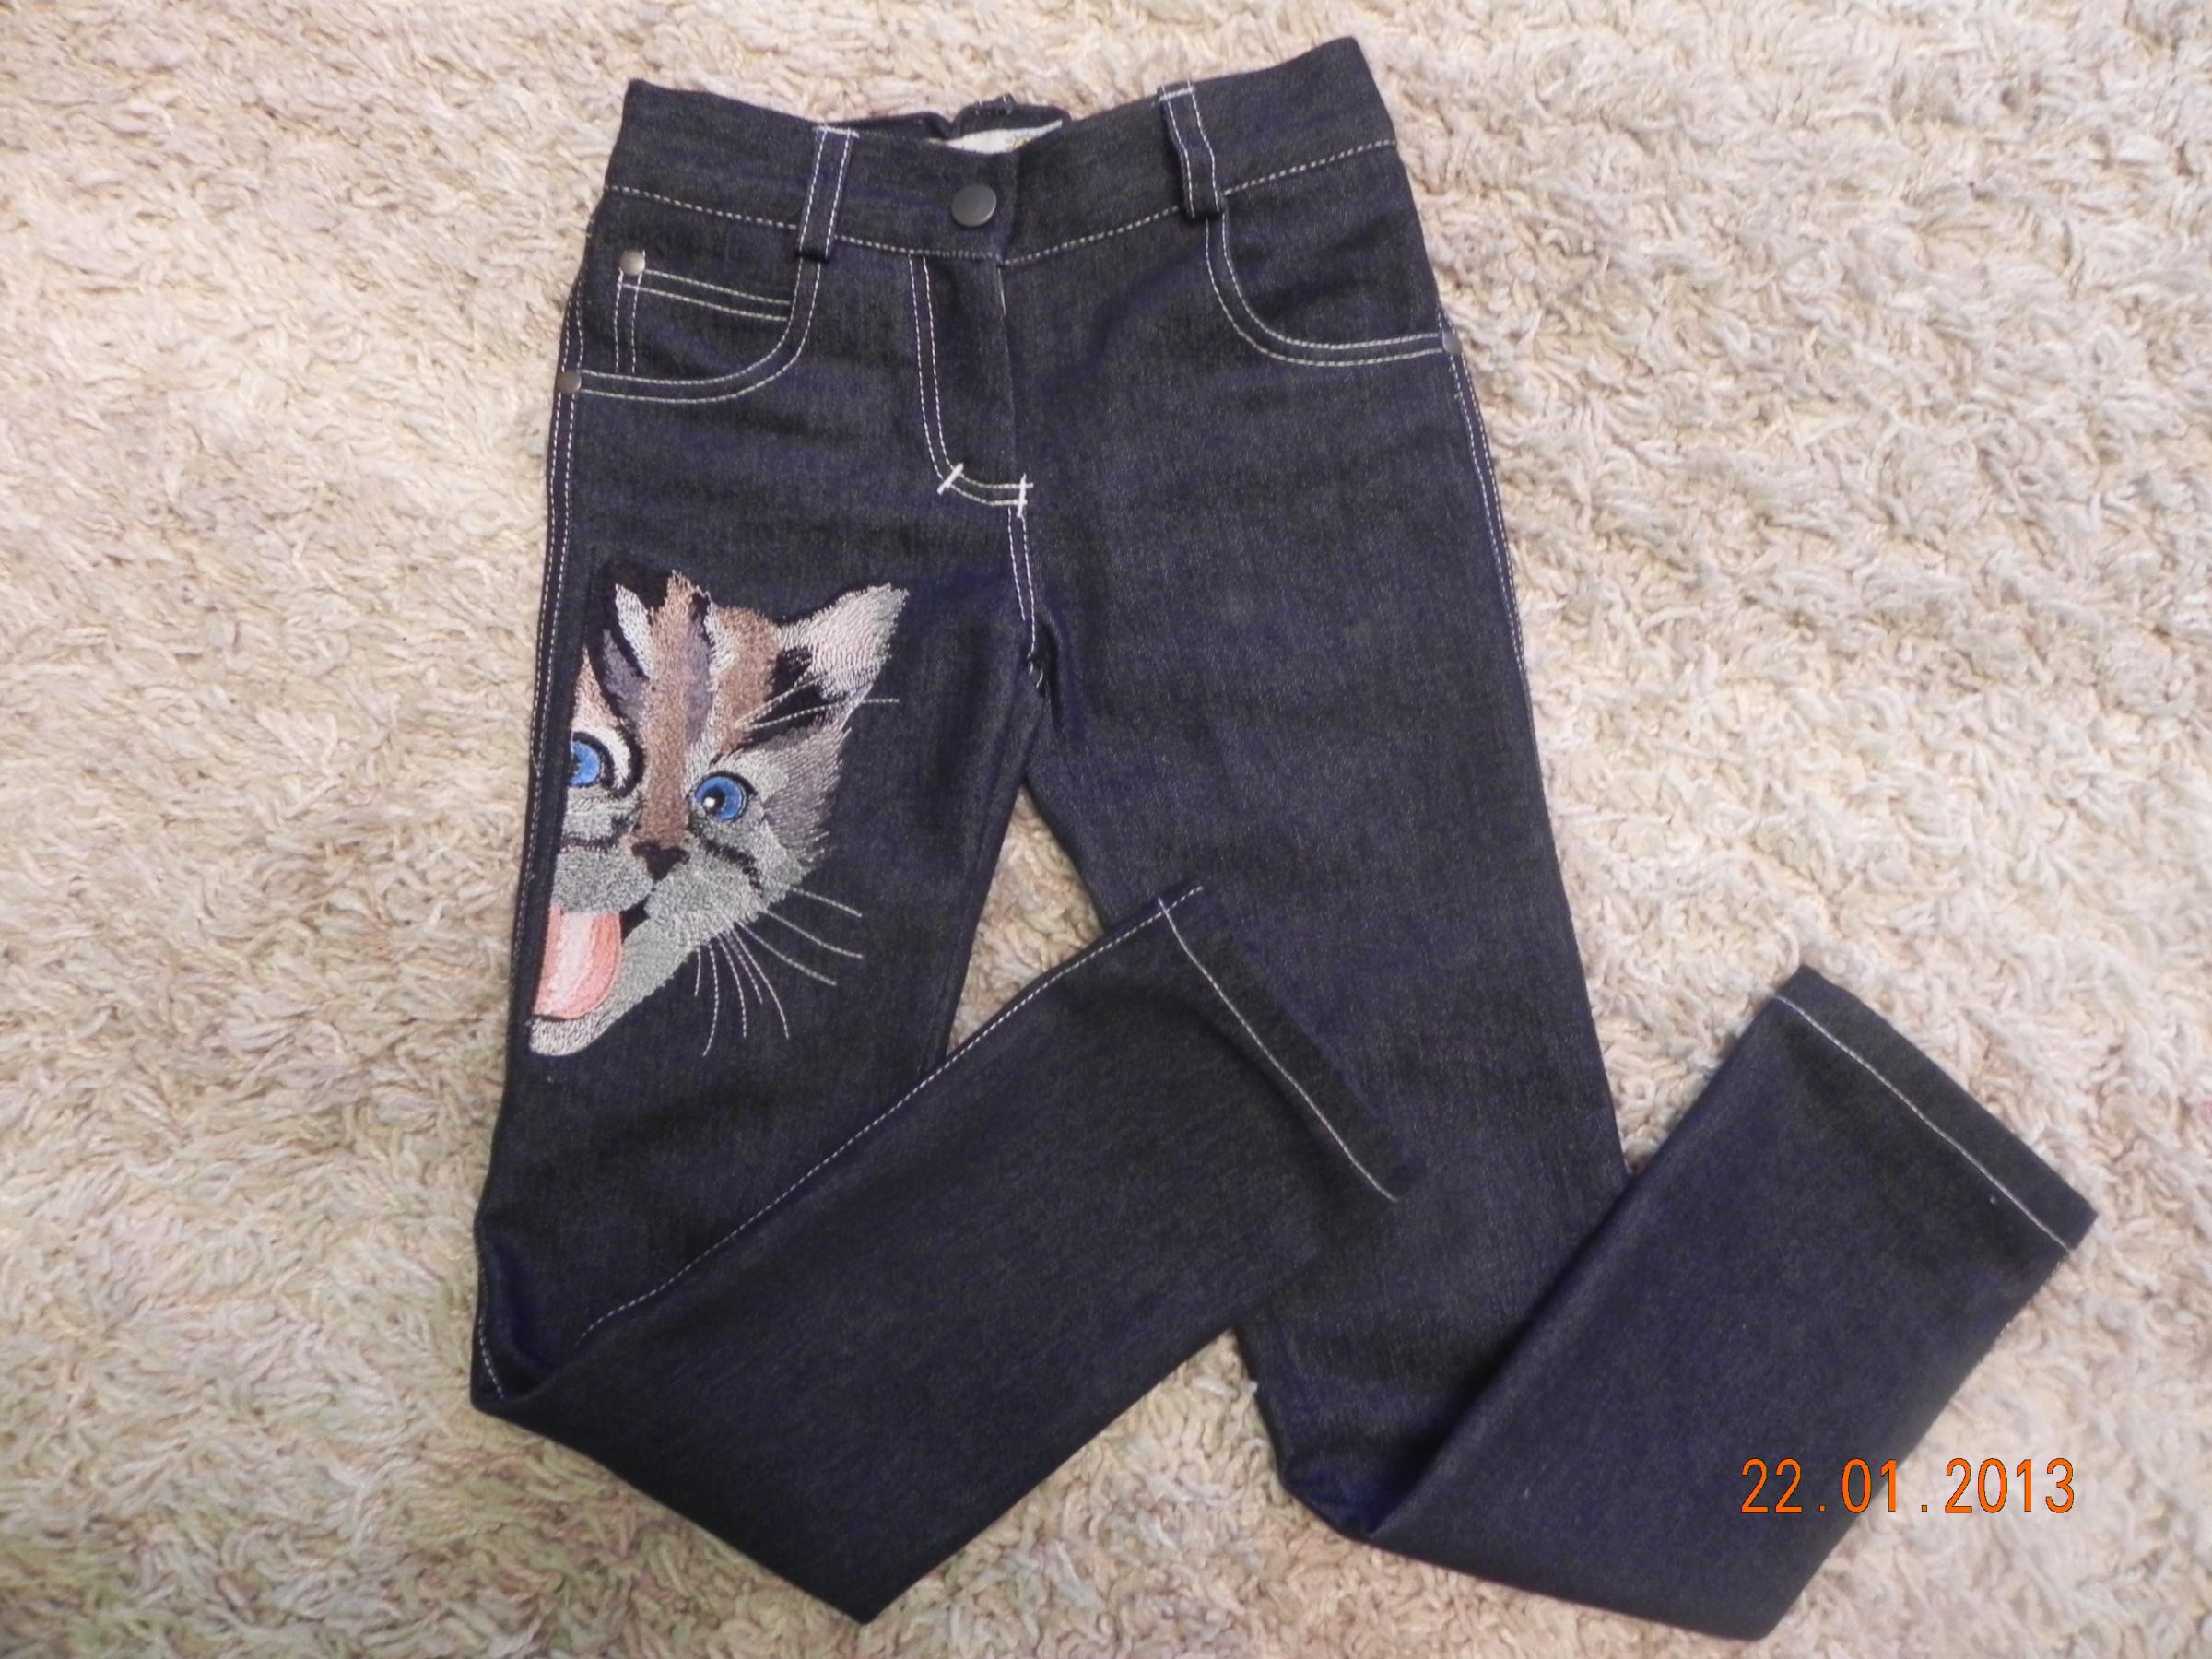 Jeans with cat free embroidery design